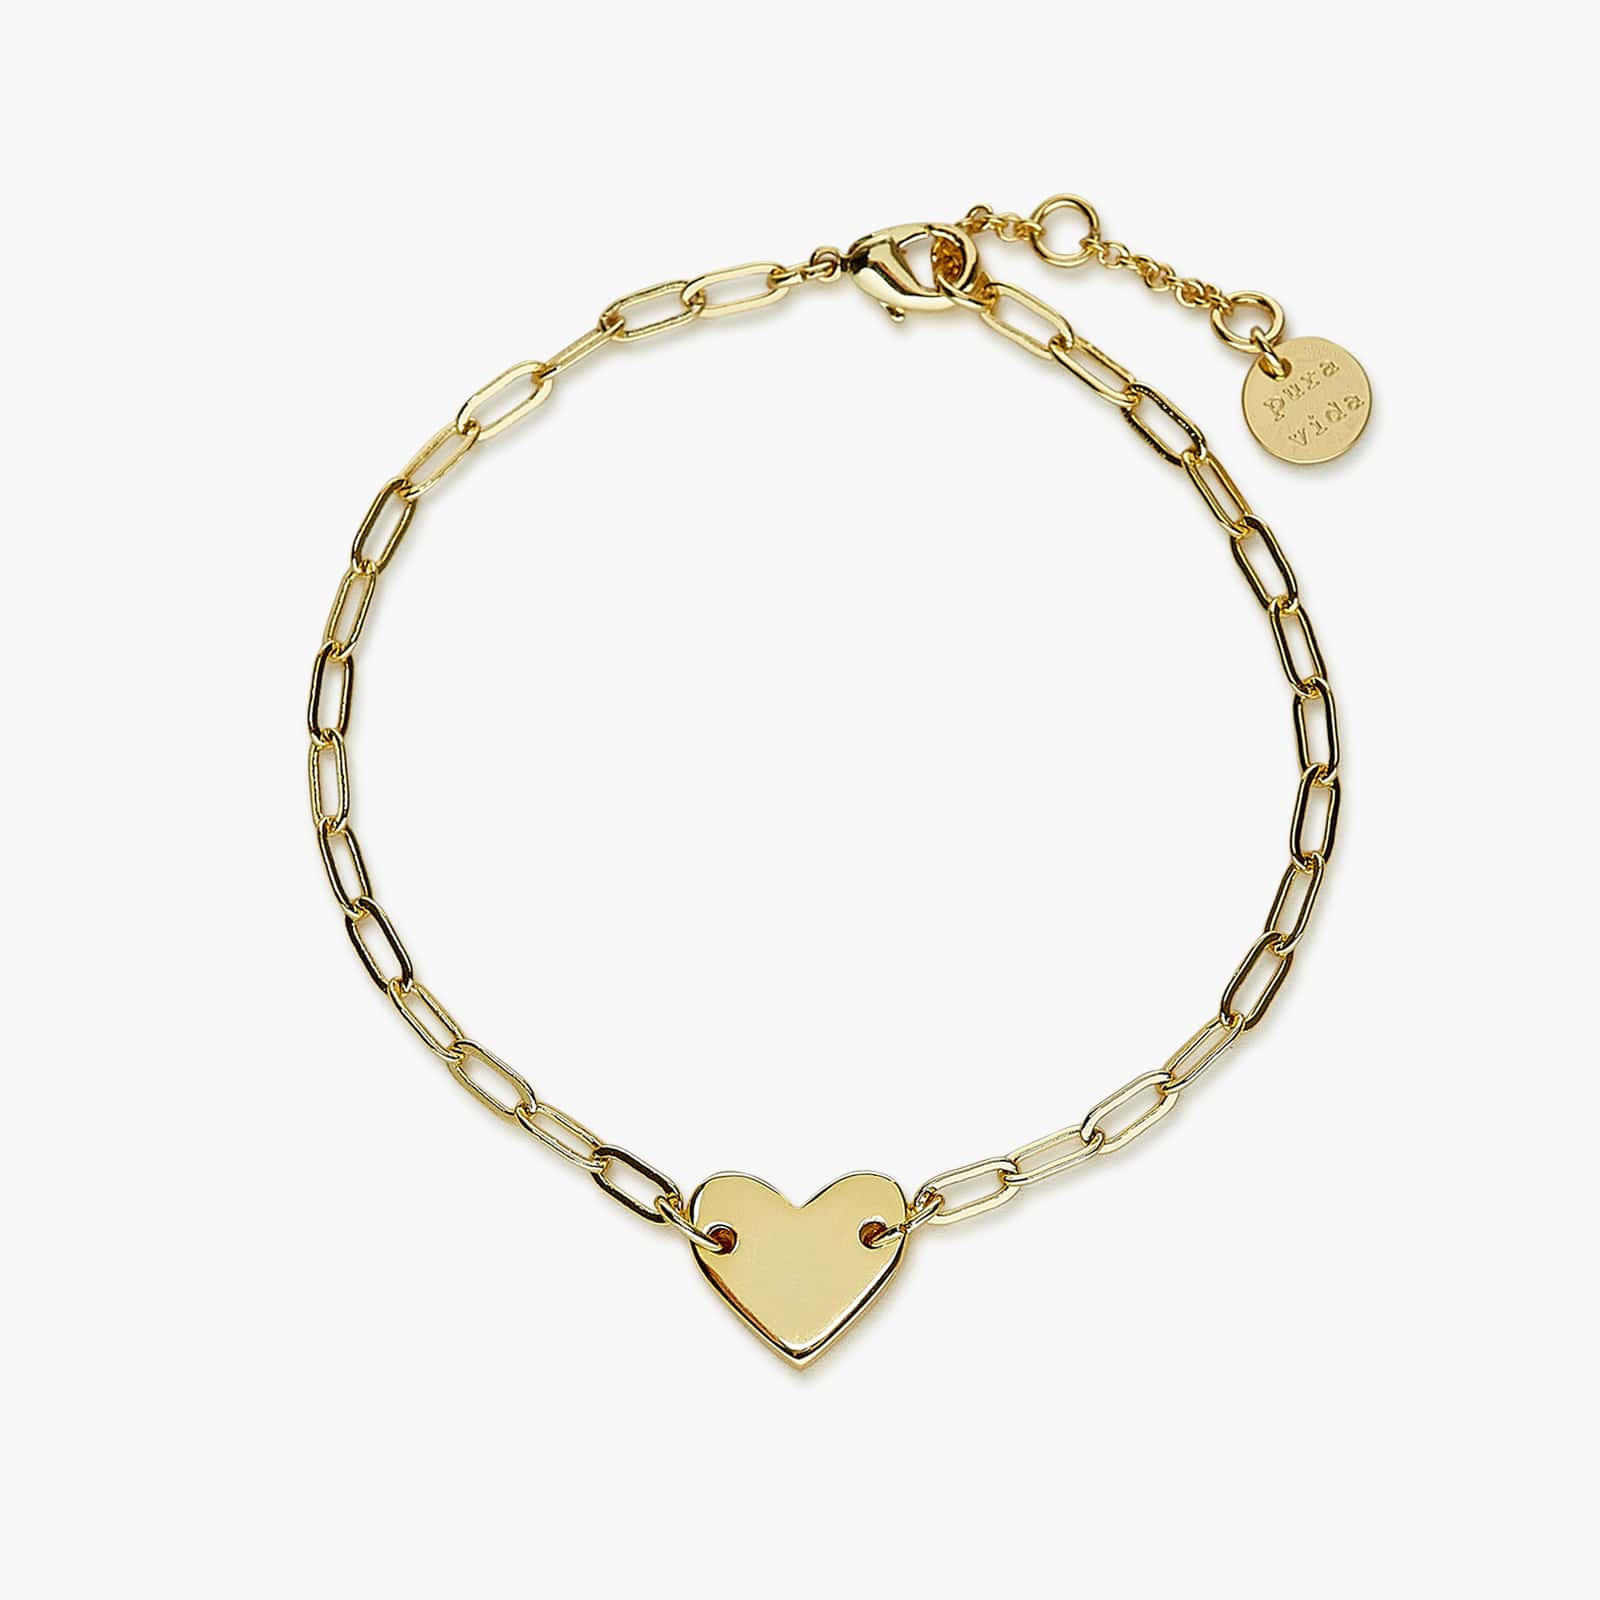 Heart Chain Bracelet – Made By Mary